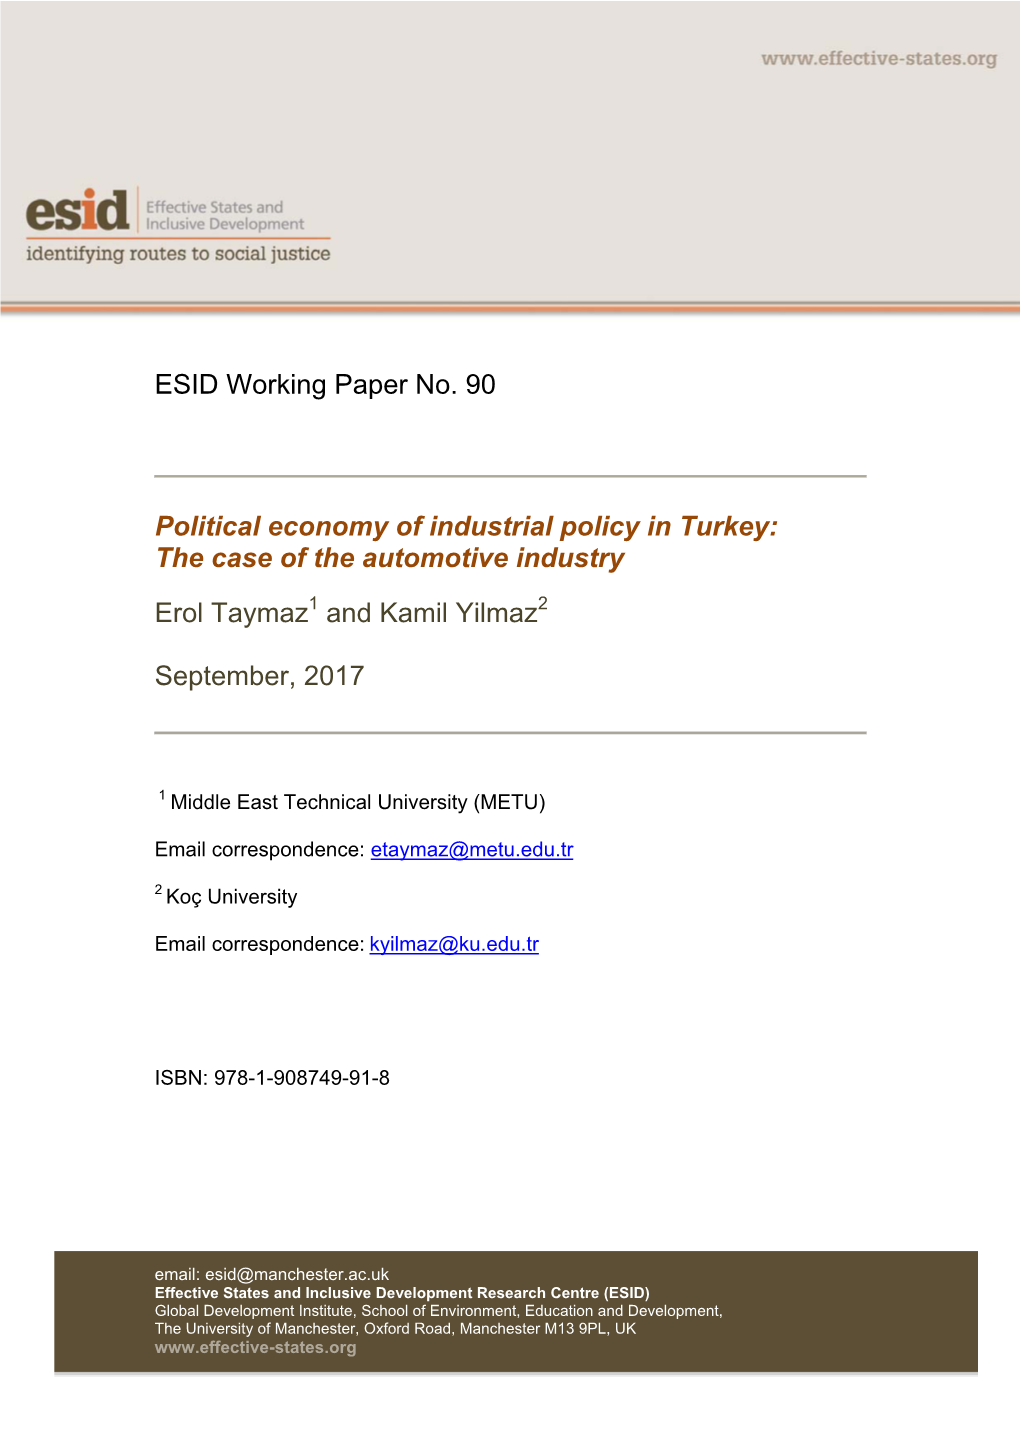 ESID Working Paper No. 90 Political Economy of Industrial Policy in Turkey